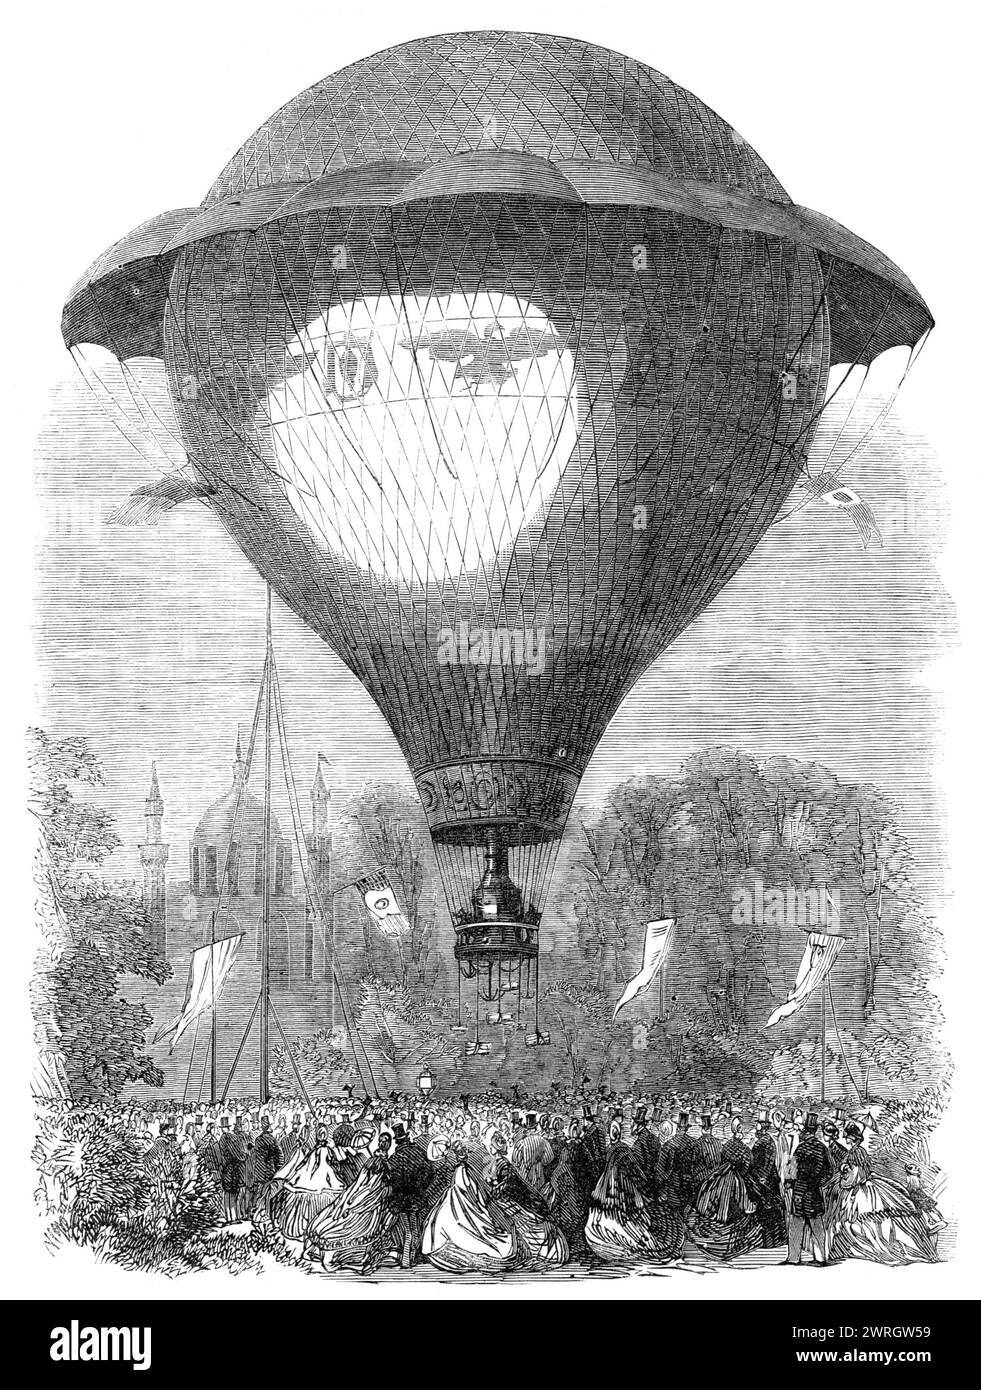 Ascent of M. Godard's Montgolfier balloon from Cremorne Gardens, [London], 1864. The '...heated-air, balloon, with which M. Eug&#xe8;ne Godard ascended...[is] an enormous structure, made of silk...adorned with representations of the French eagle...In the centre of the car is an 18 ft. stove, including the chimney, 980 pounds in weight...The total weight of the balloon...is 4620lb...M. Godard ran rapidly round the solid wicker car, shouting orders through a speaking-trumpet...For a few seconds the balloon seemed to return to the gardens, and to descend towards the grass, while the stokers were Stock Photo